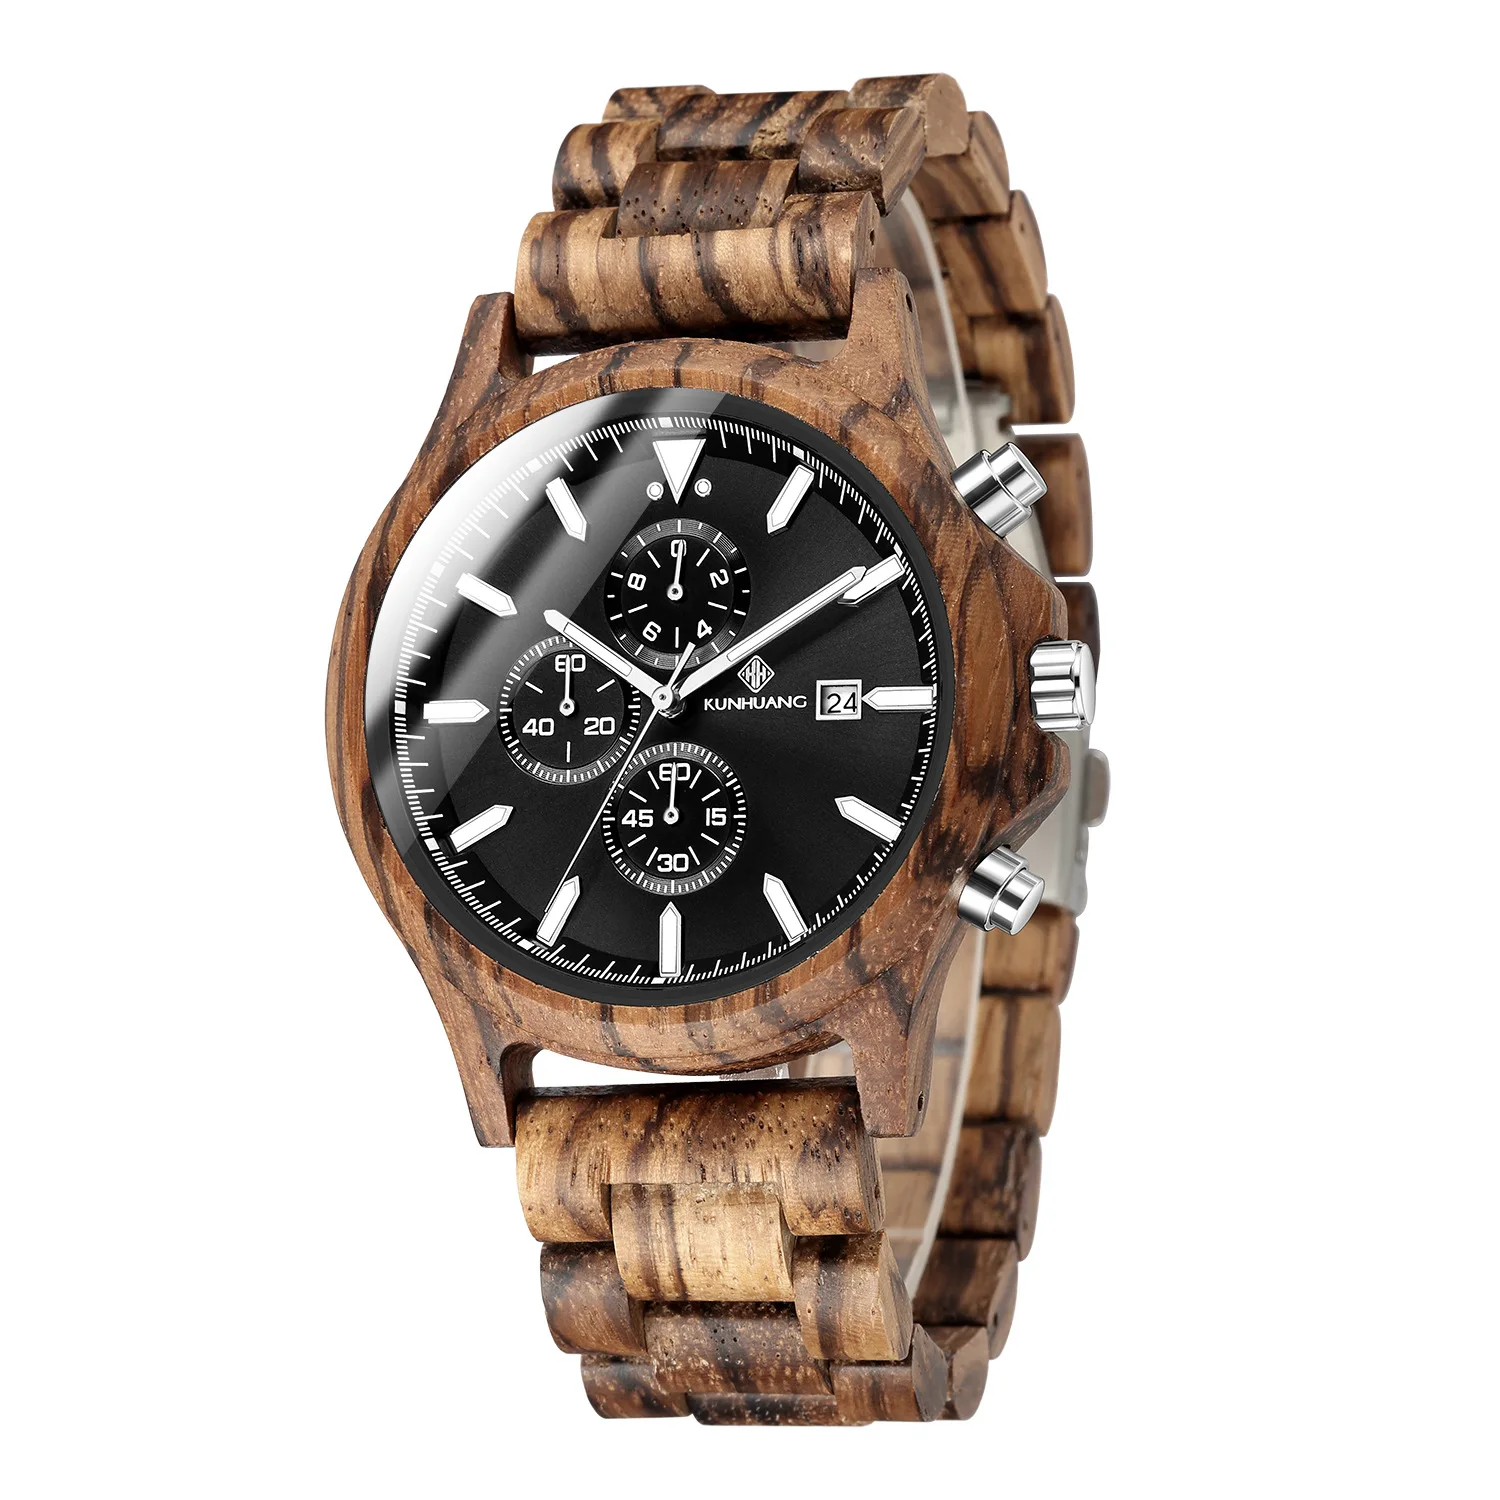 

Dropshipping Wholesale Luxury Walnut Wood Watch Sports Chronograph Wooden Watches Men Wrist Holzuhr, Multiple color options